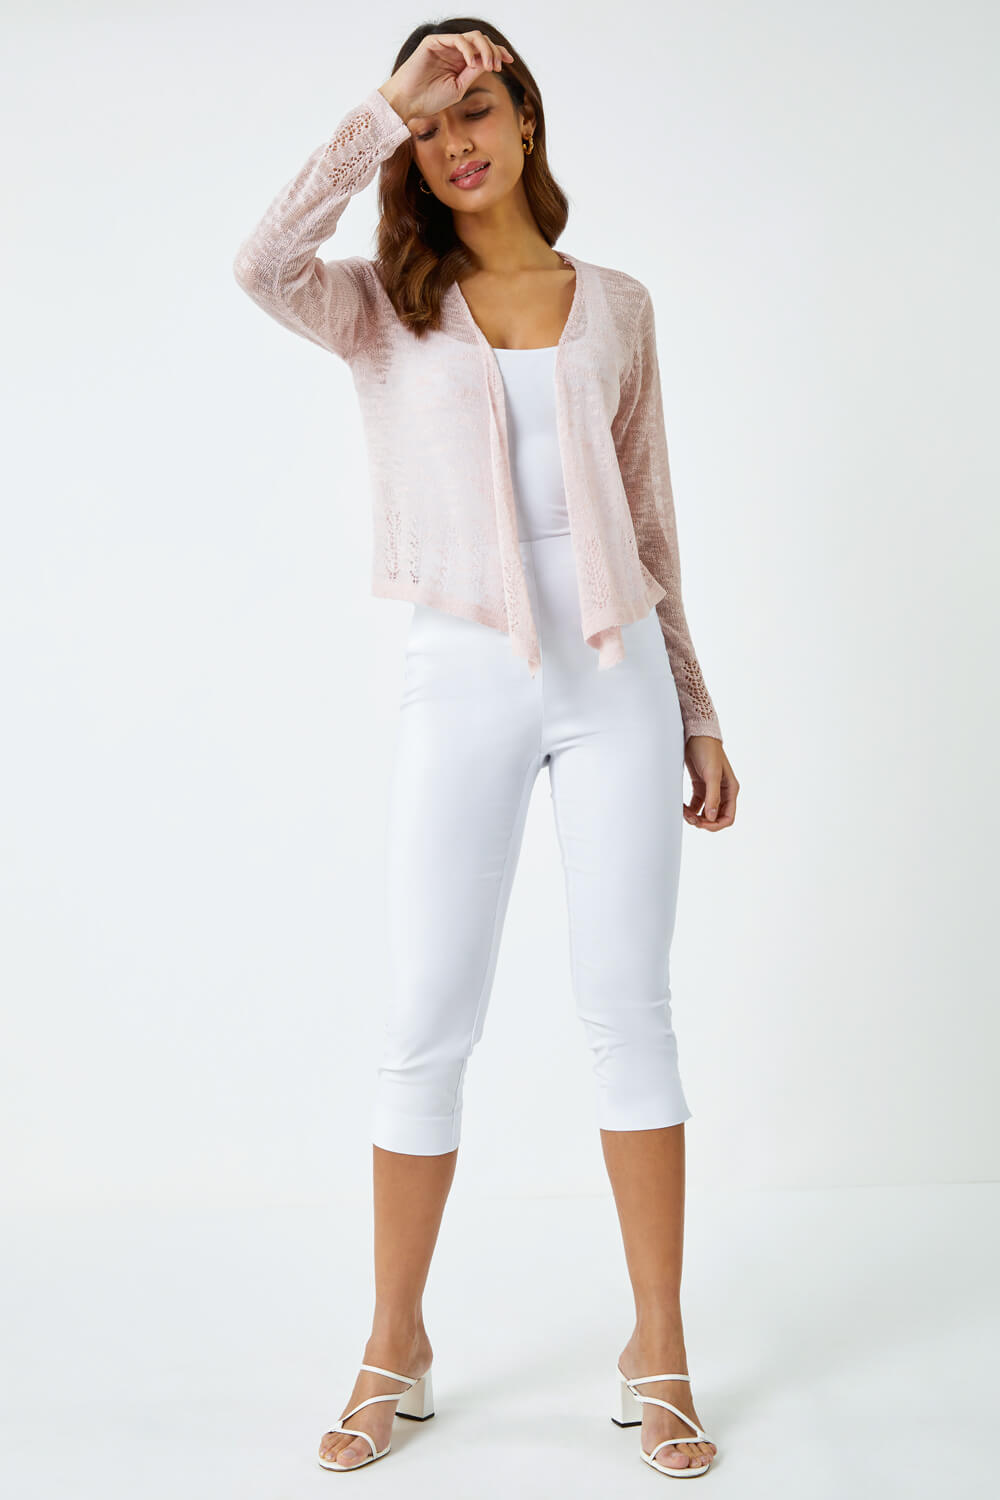 PINK Lightweight Knitted Shrug, Image 2 of 5